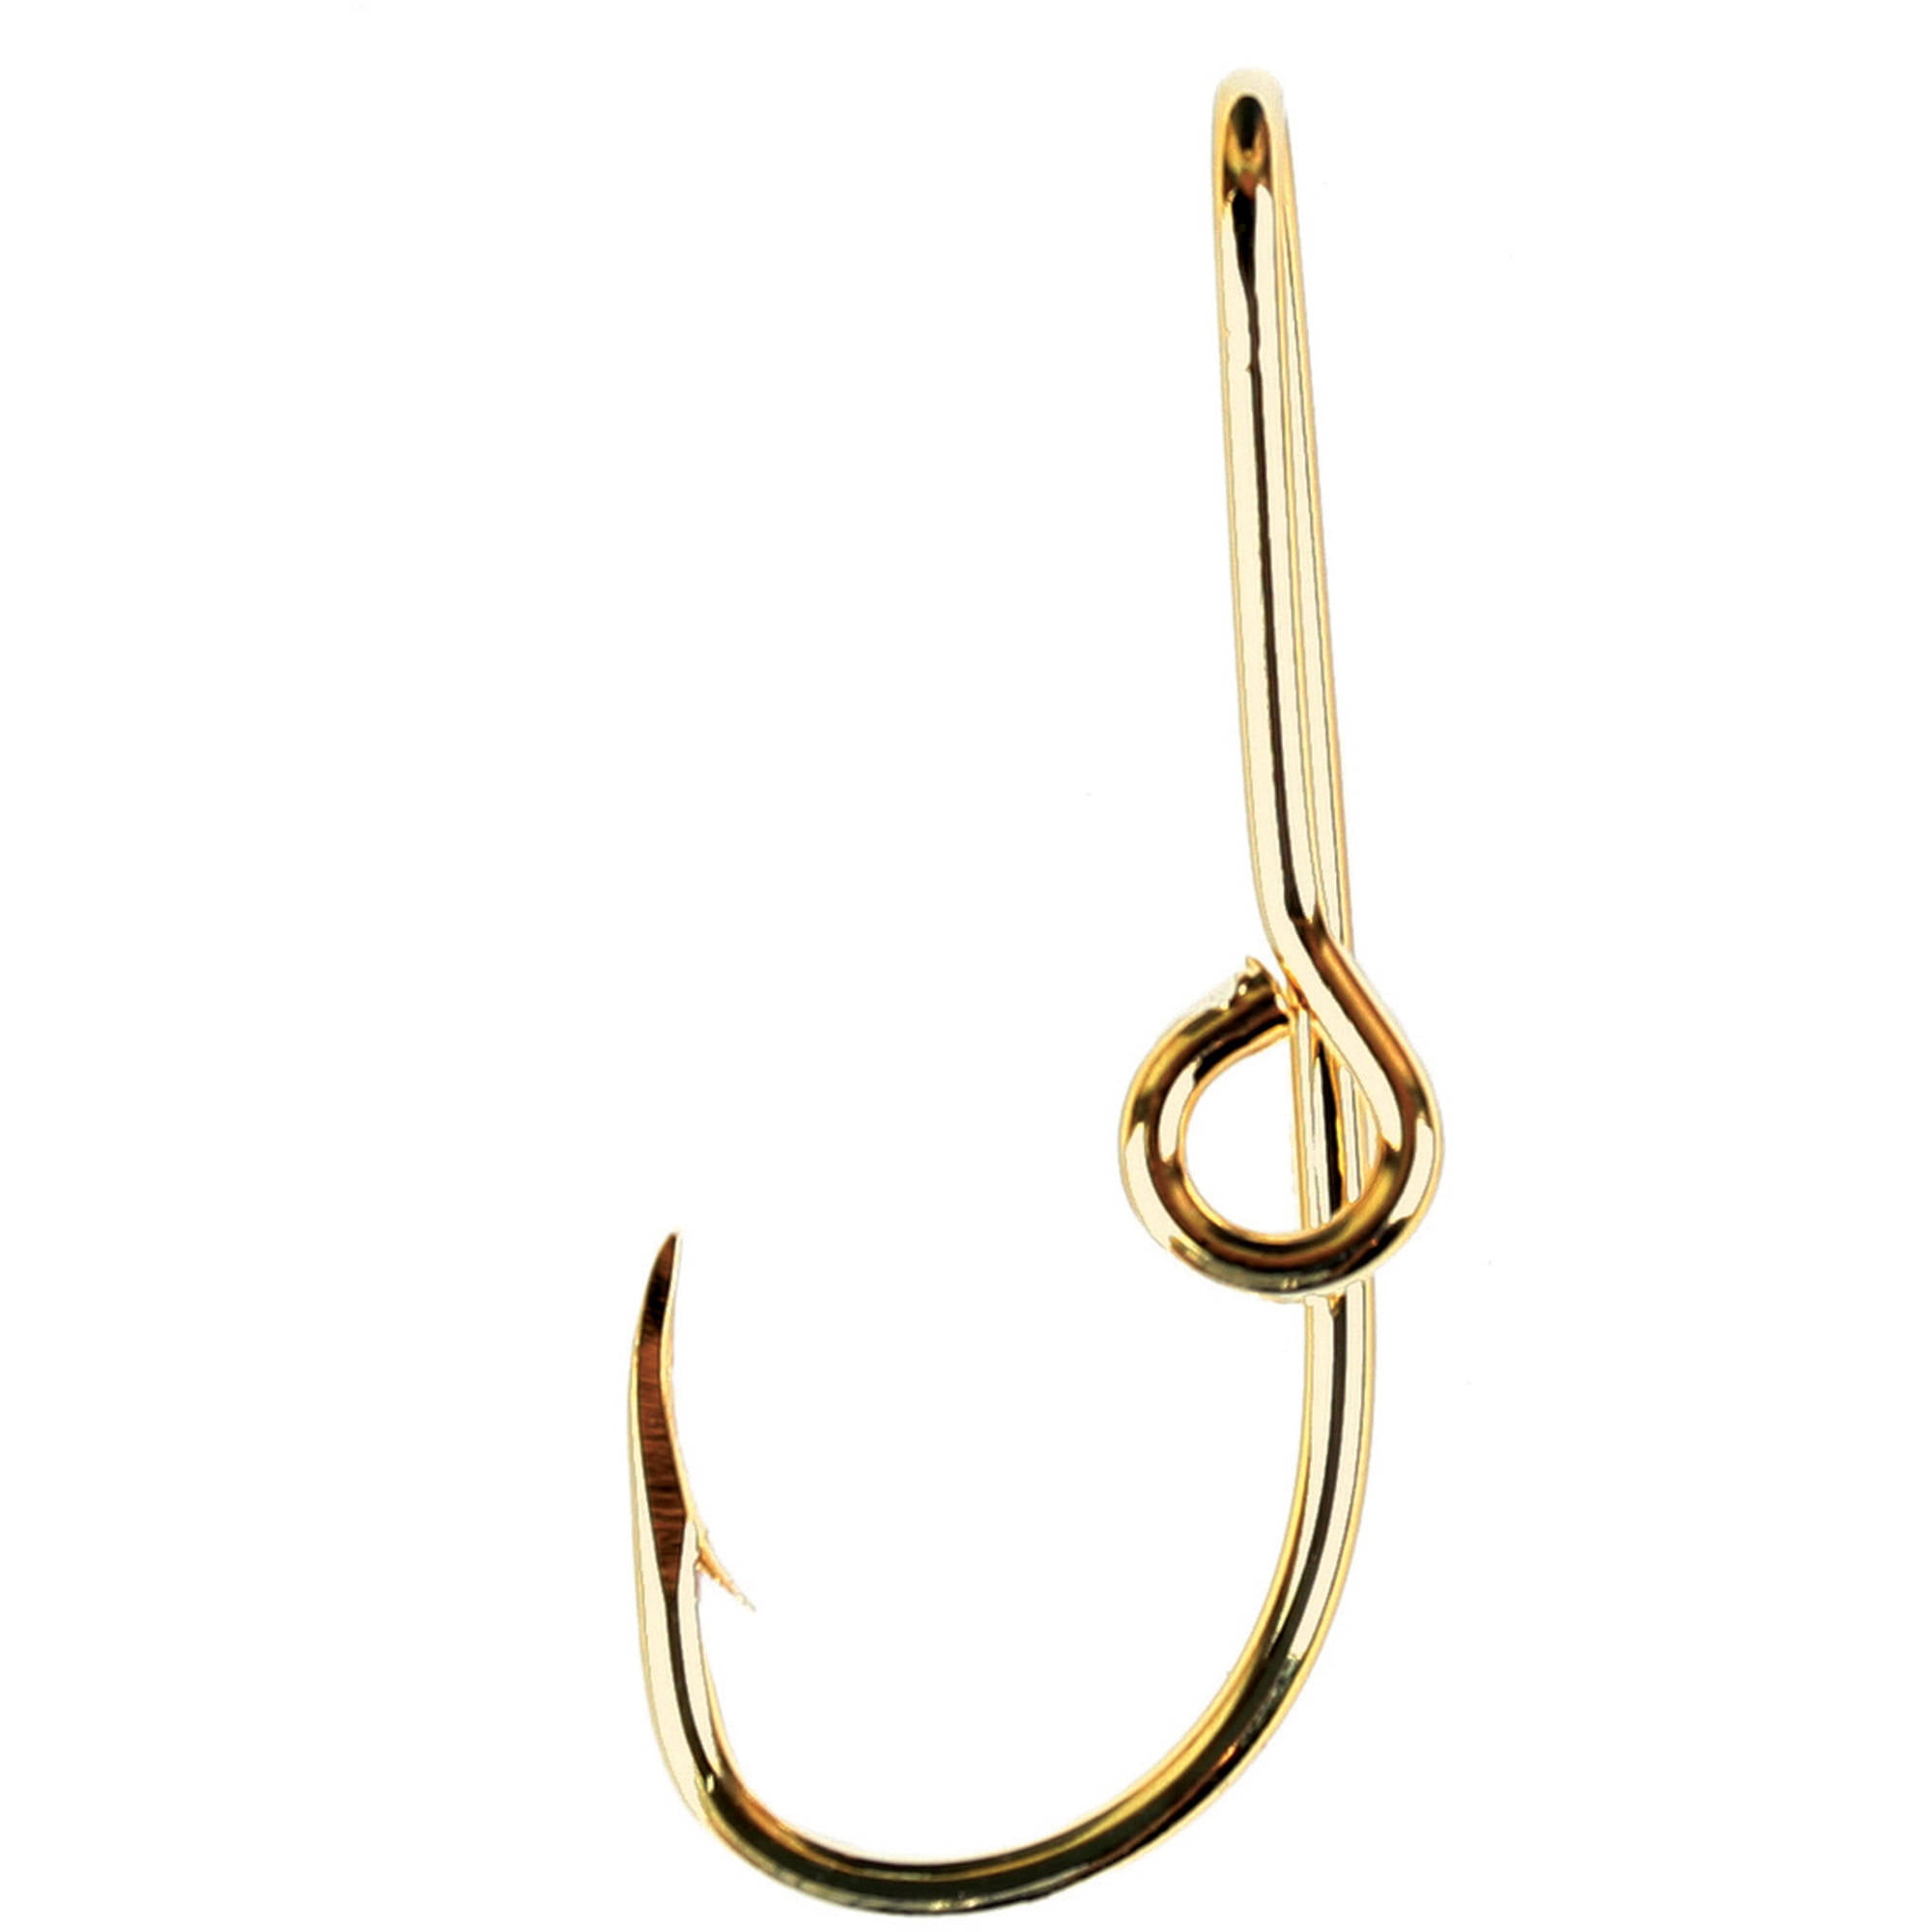 100 EAGLE CLAW HAT HOOKS Hat Pin/Tie Clasp GOLD PLATED FISH HOOK HAT PINS #155 